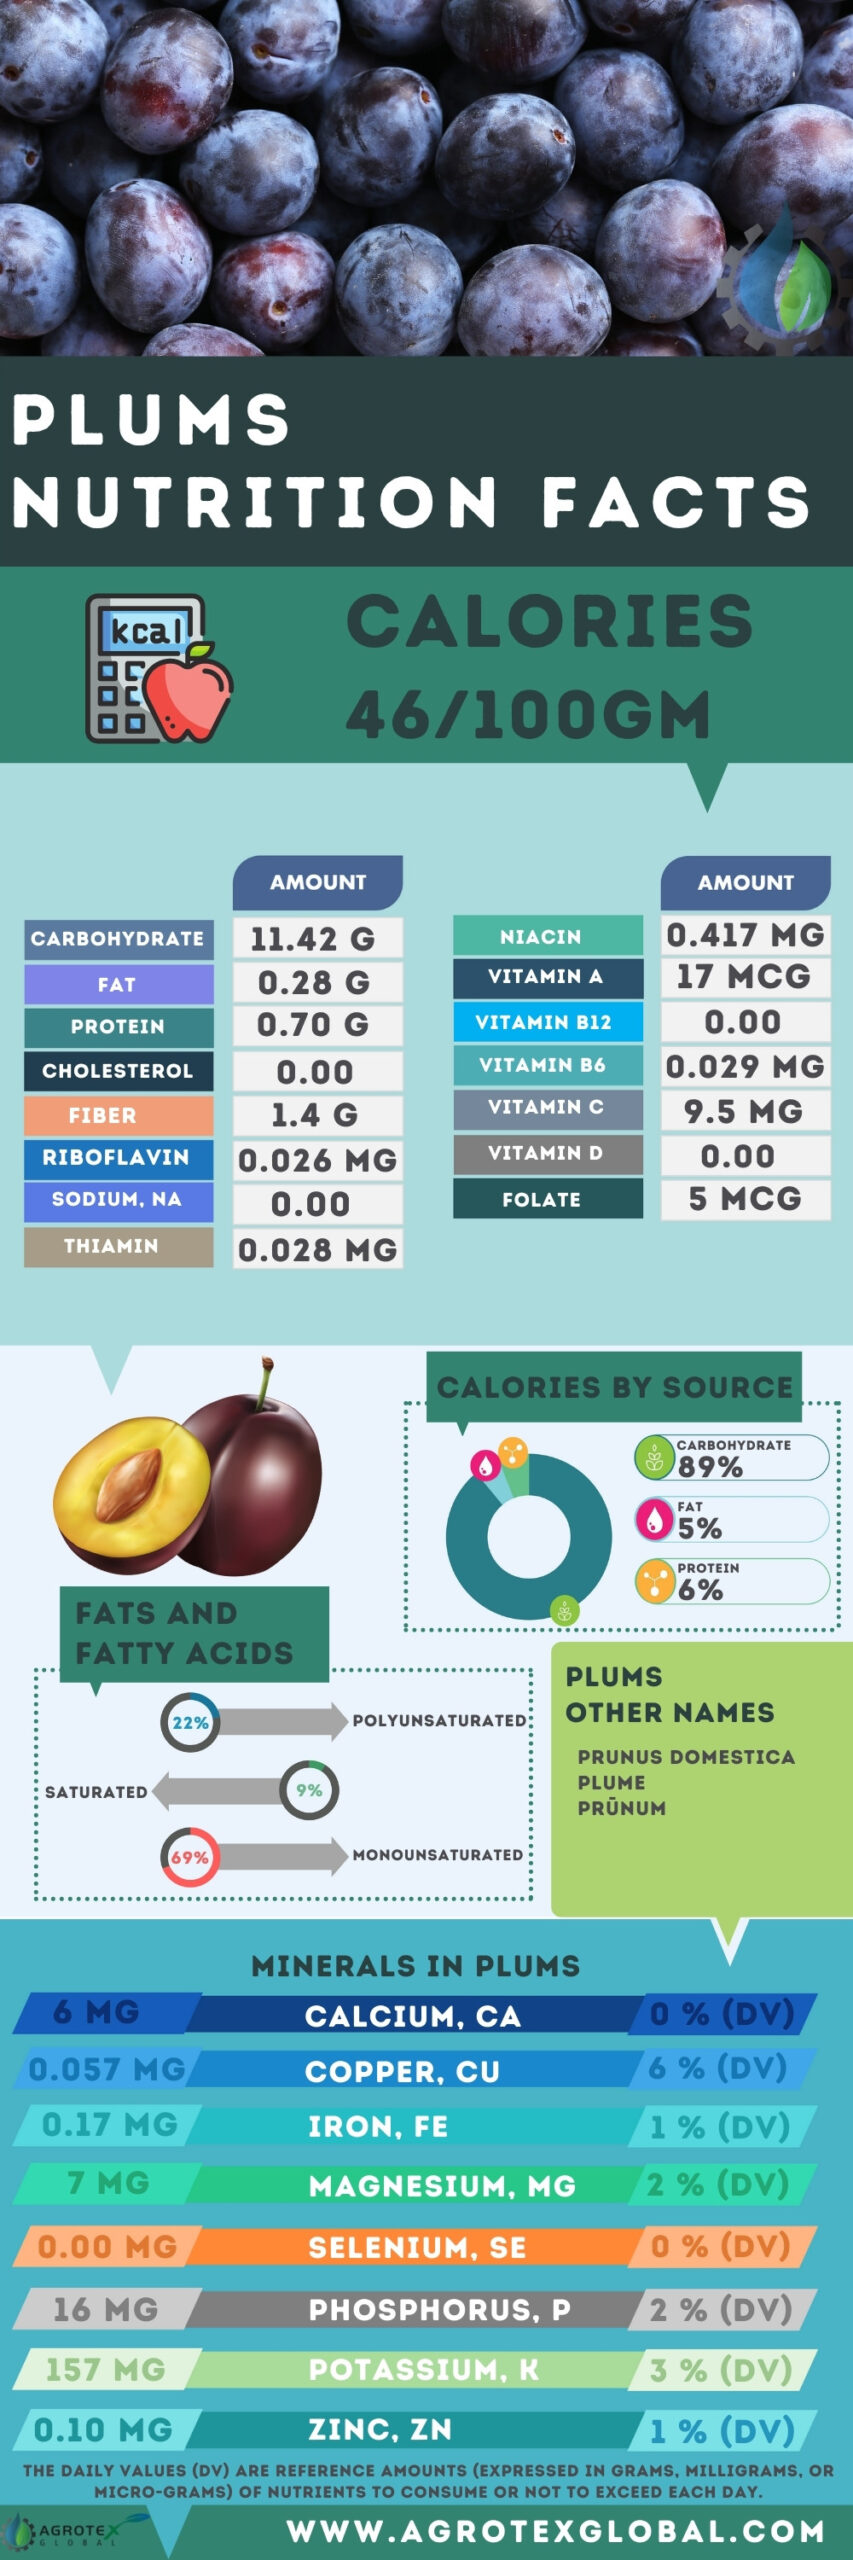 Plums NUTRITION FACTS calorie chart infographic